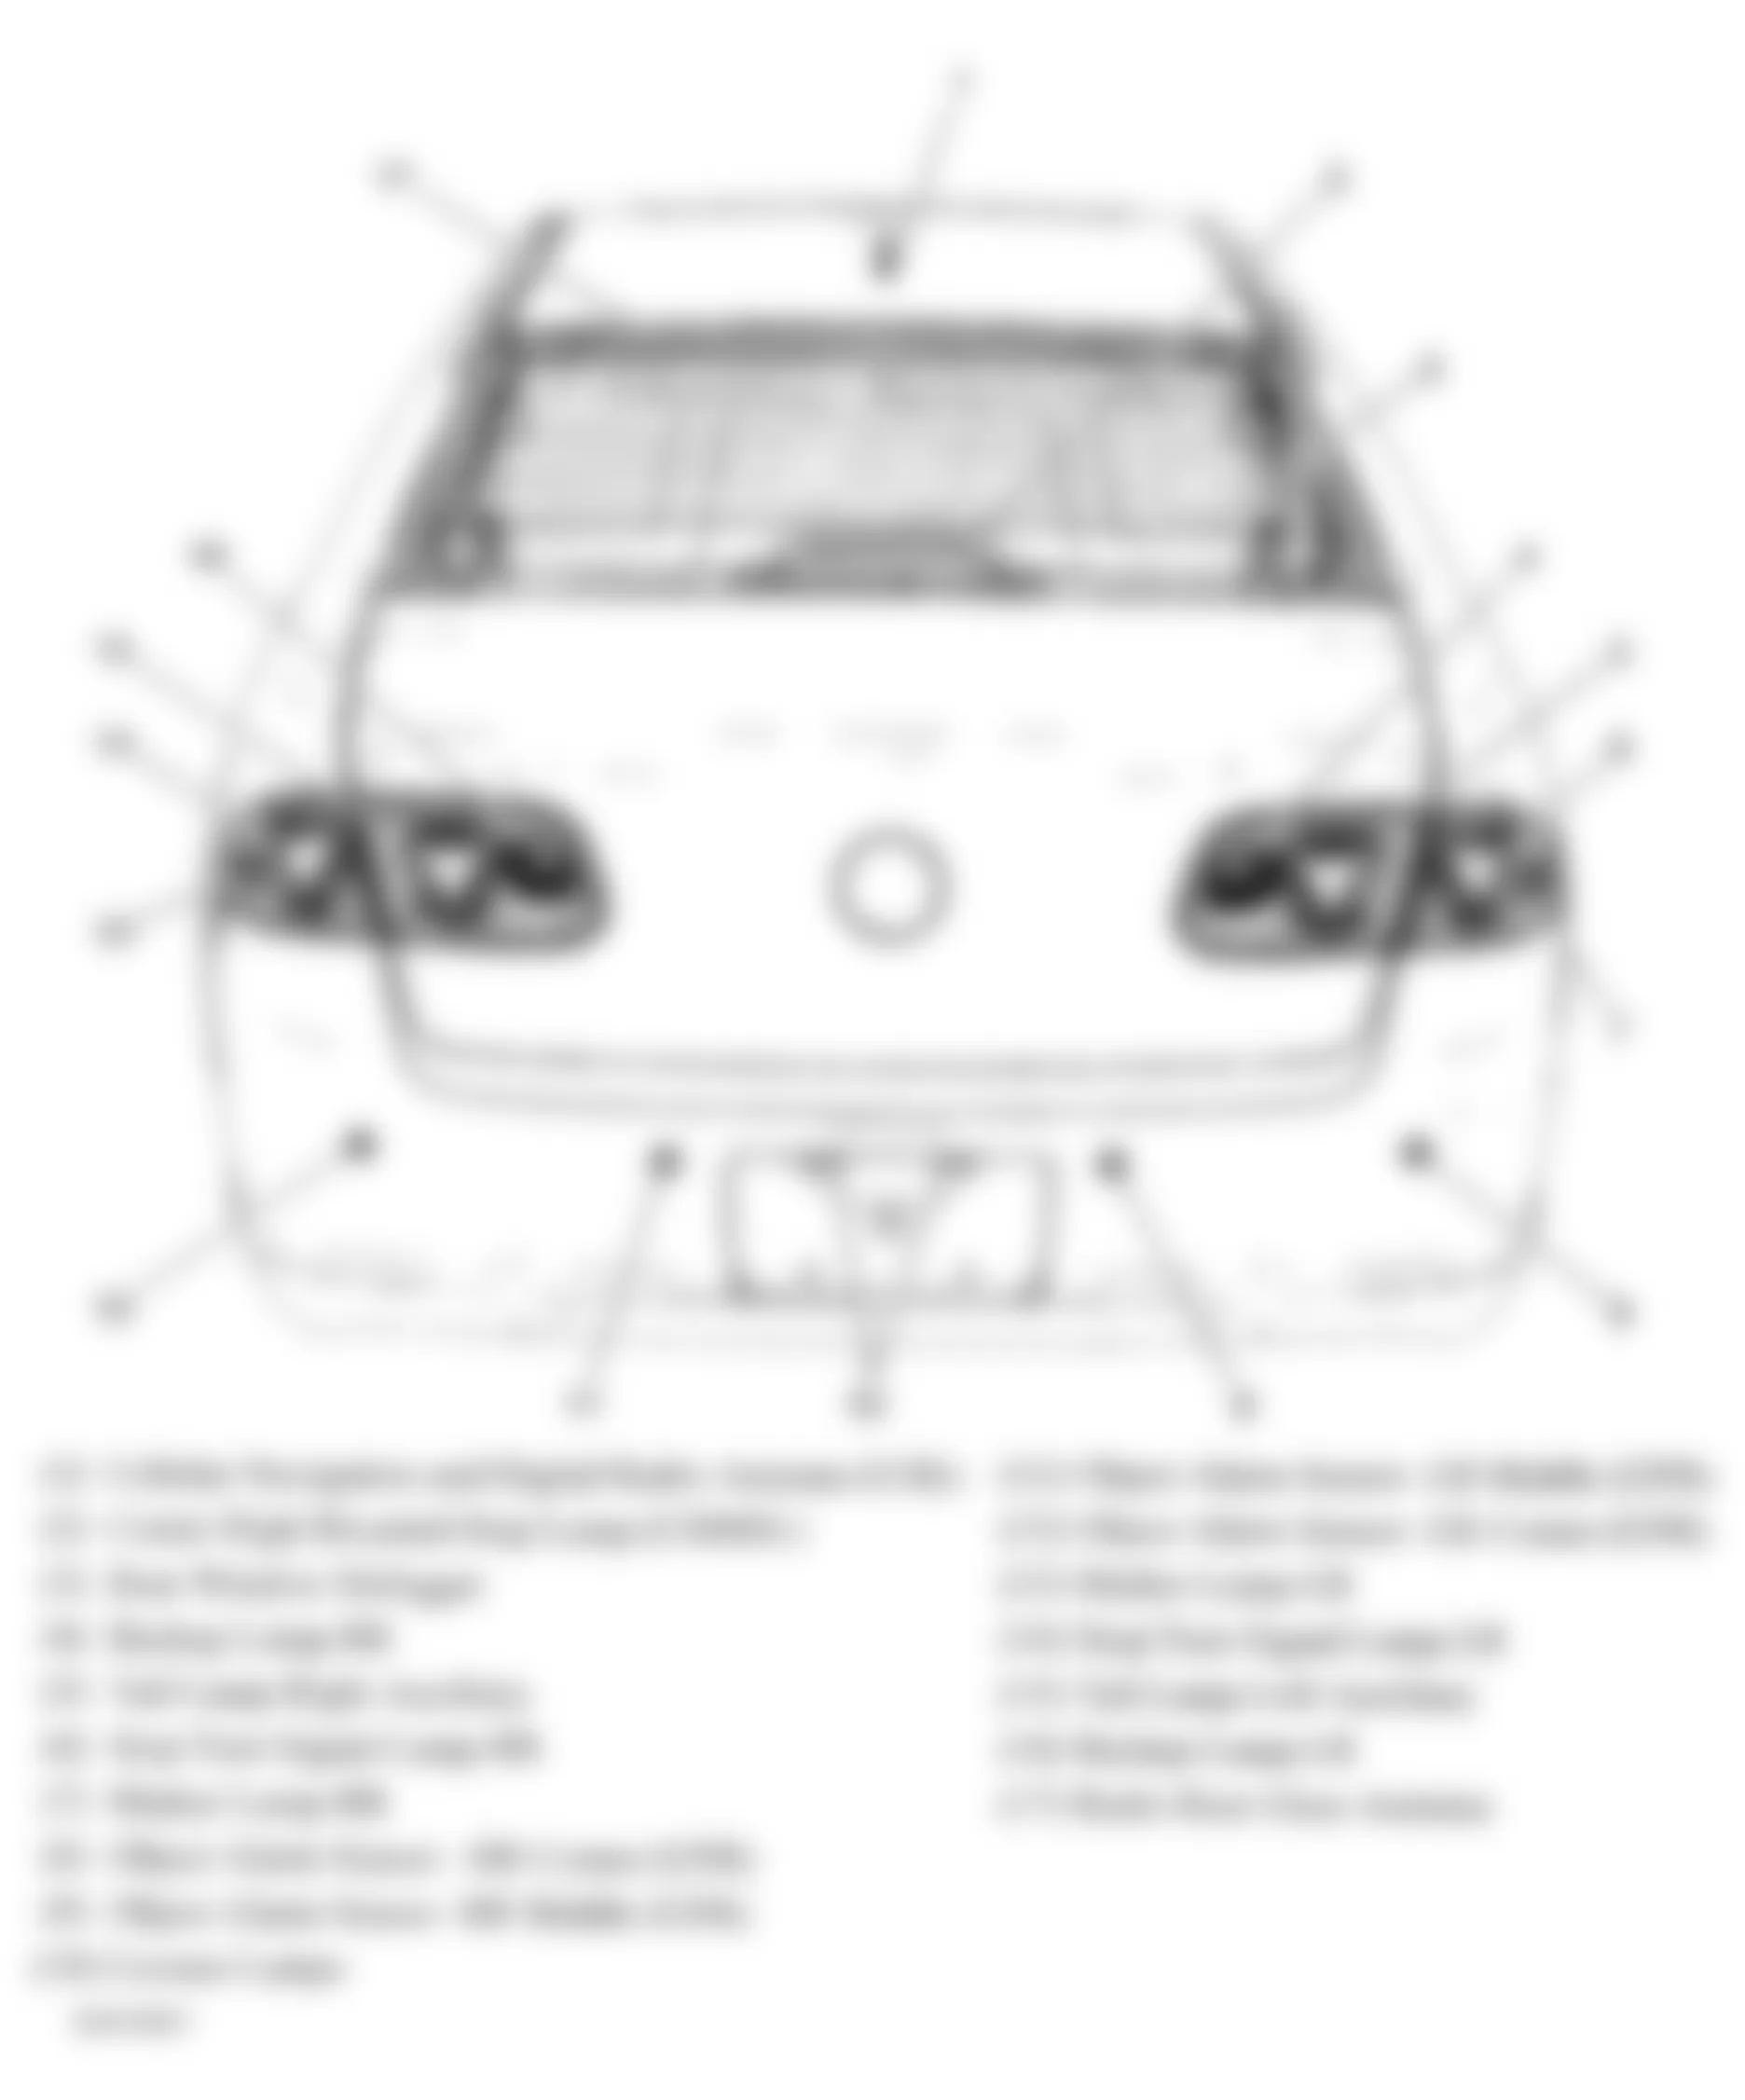 Buick Lucerne CXL 2006 - Component Locations -  Rear Of Vehicle